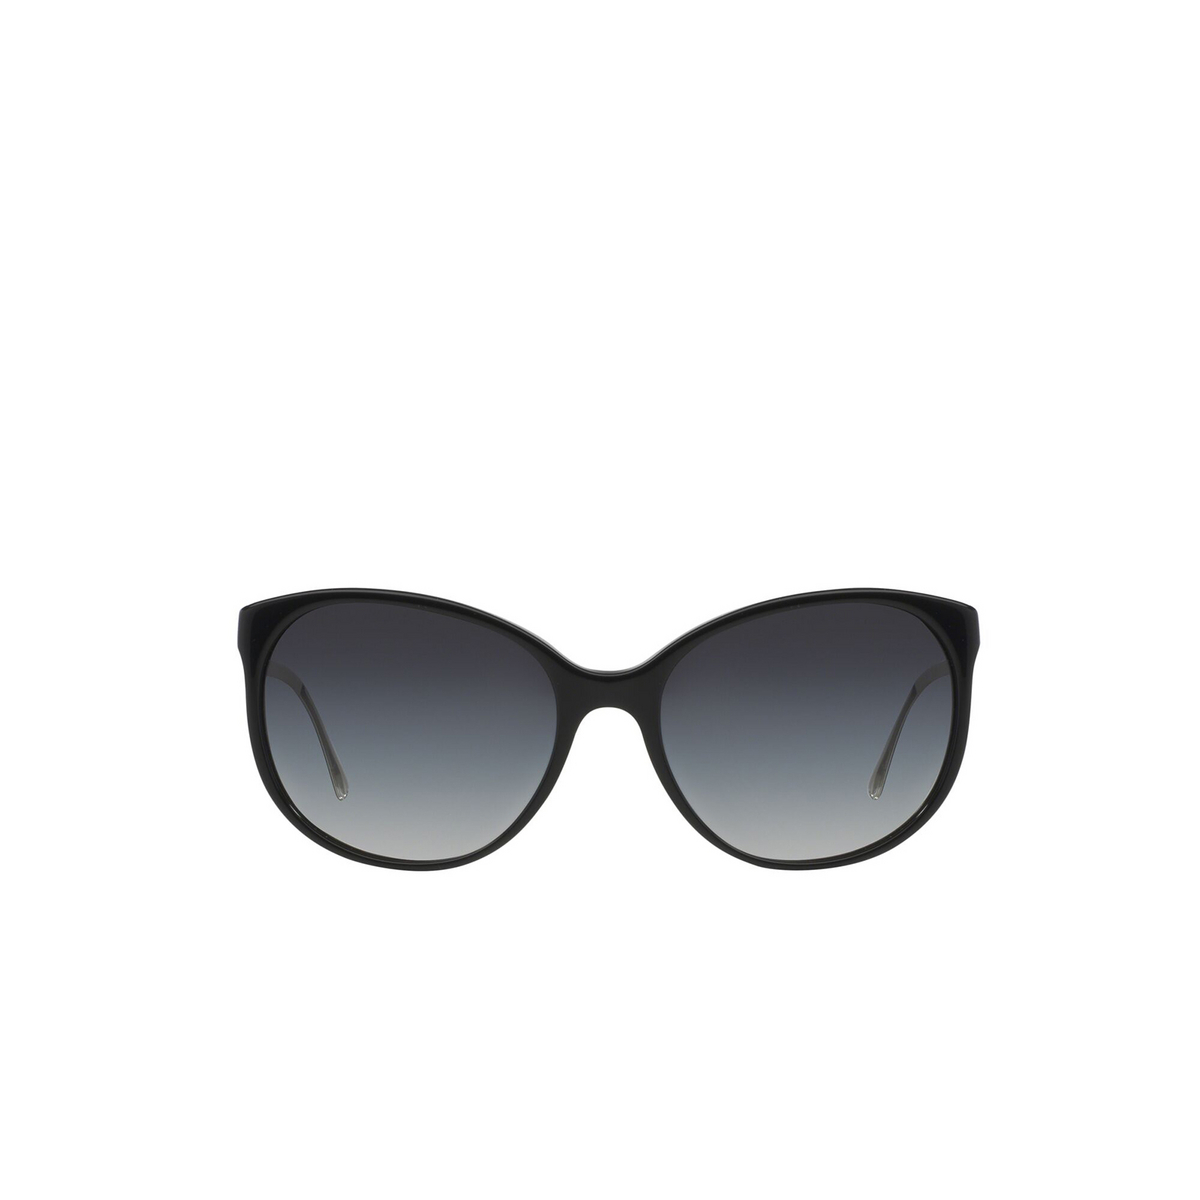 Burberry® Cat-eye Sunglasses: BE4146 color Black 34068G - front view.